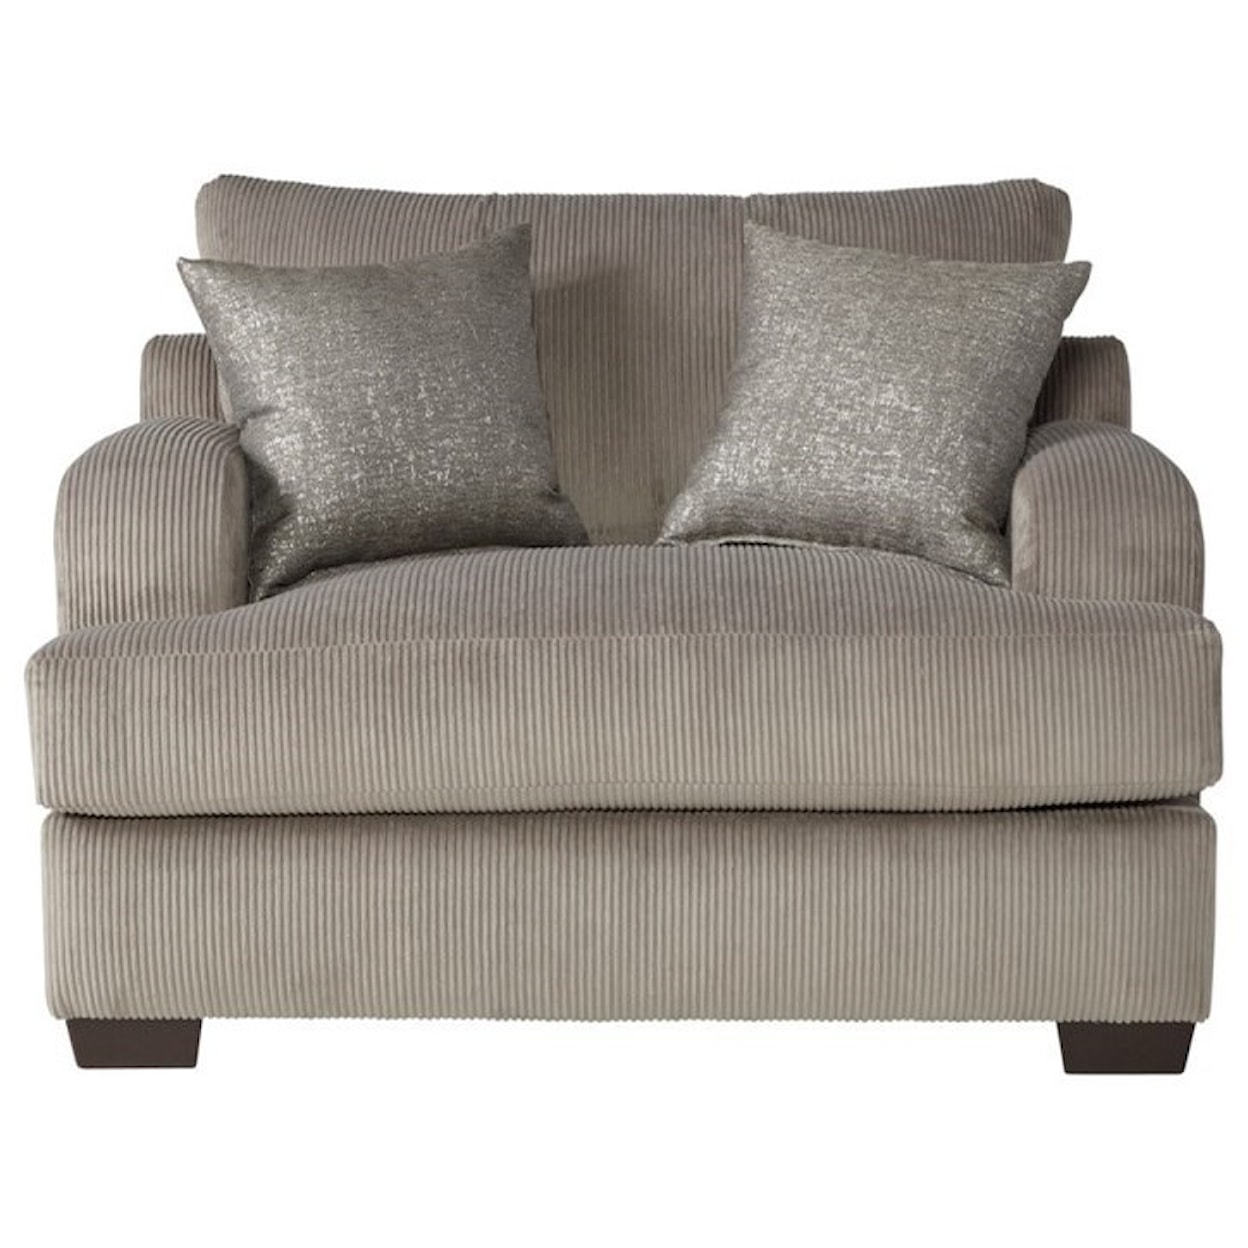 Serta Upholstery by Hughes Furniture 14100 Cuddle Chair